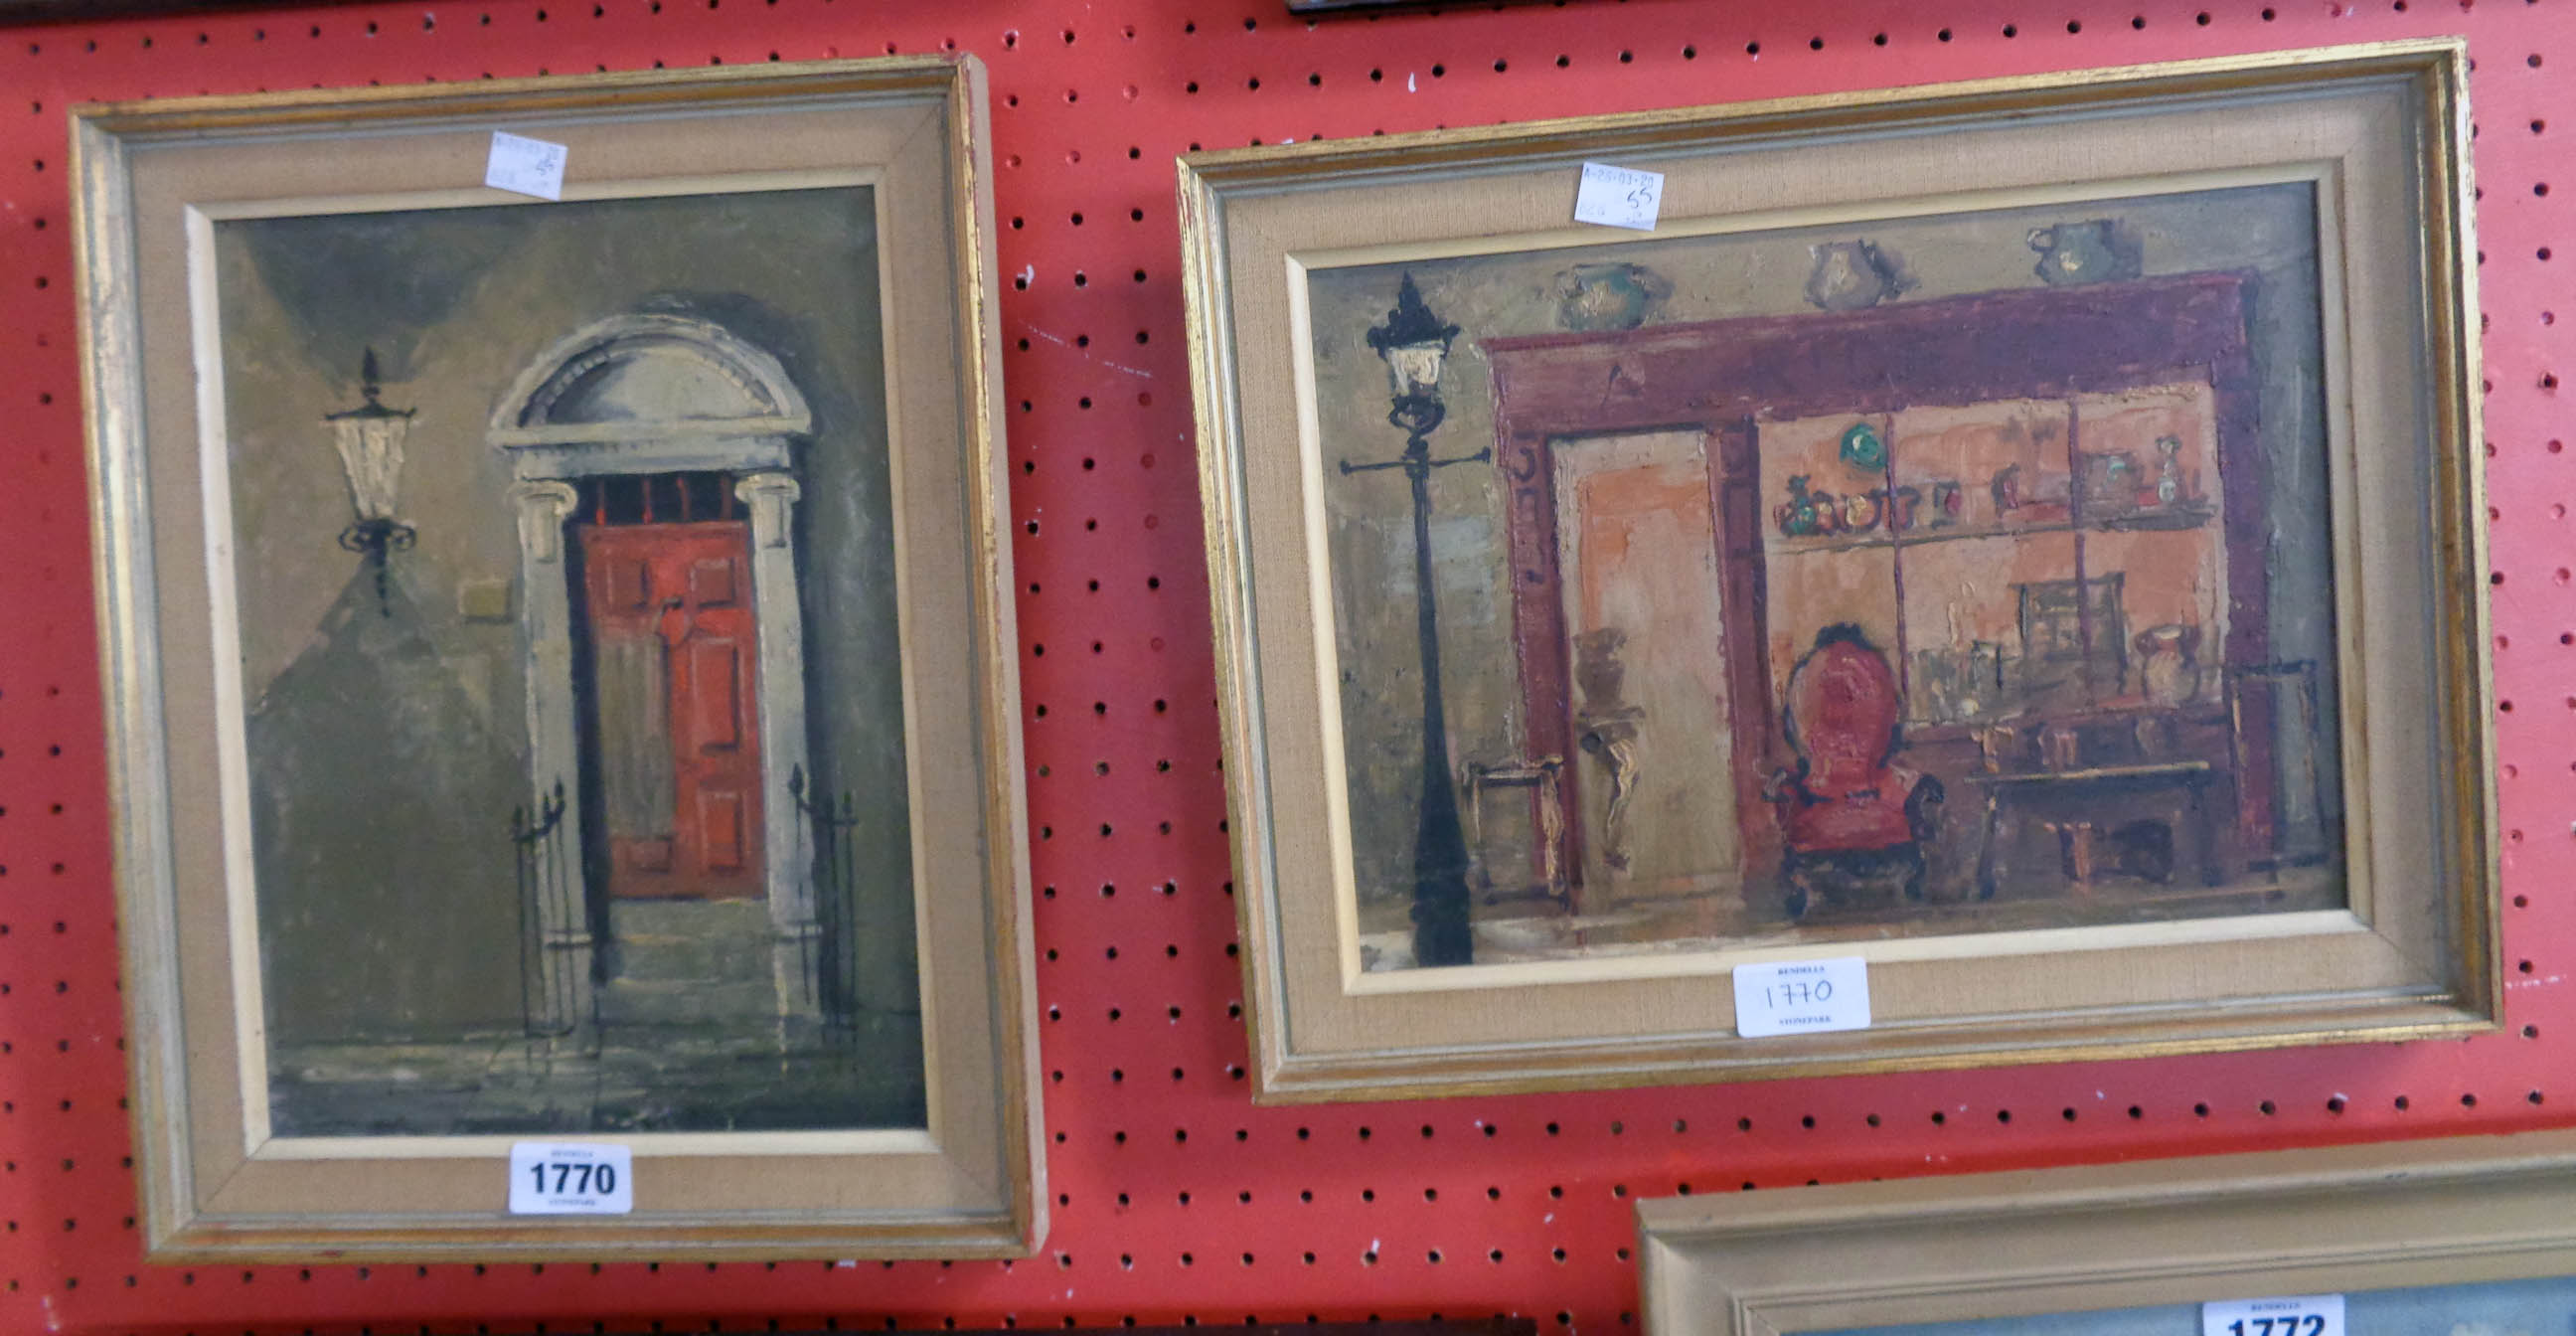 A pair of gilt and hessian framed vintage oils on board, one depicting a red doorway - signed